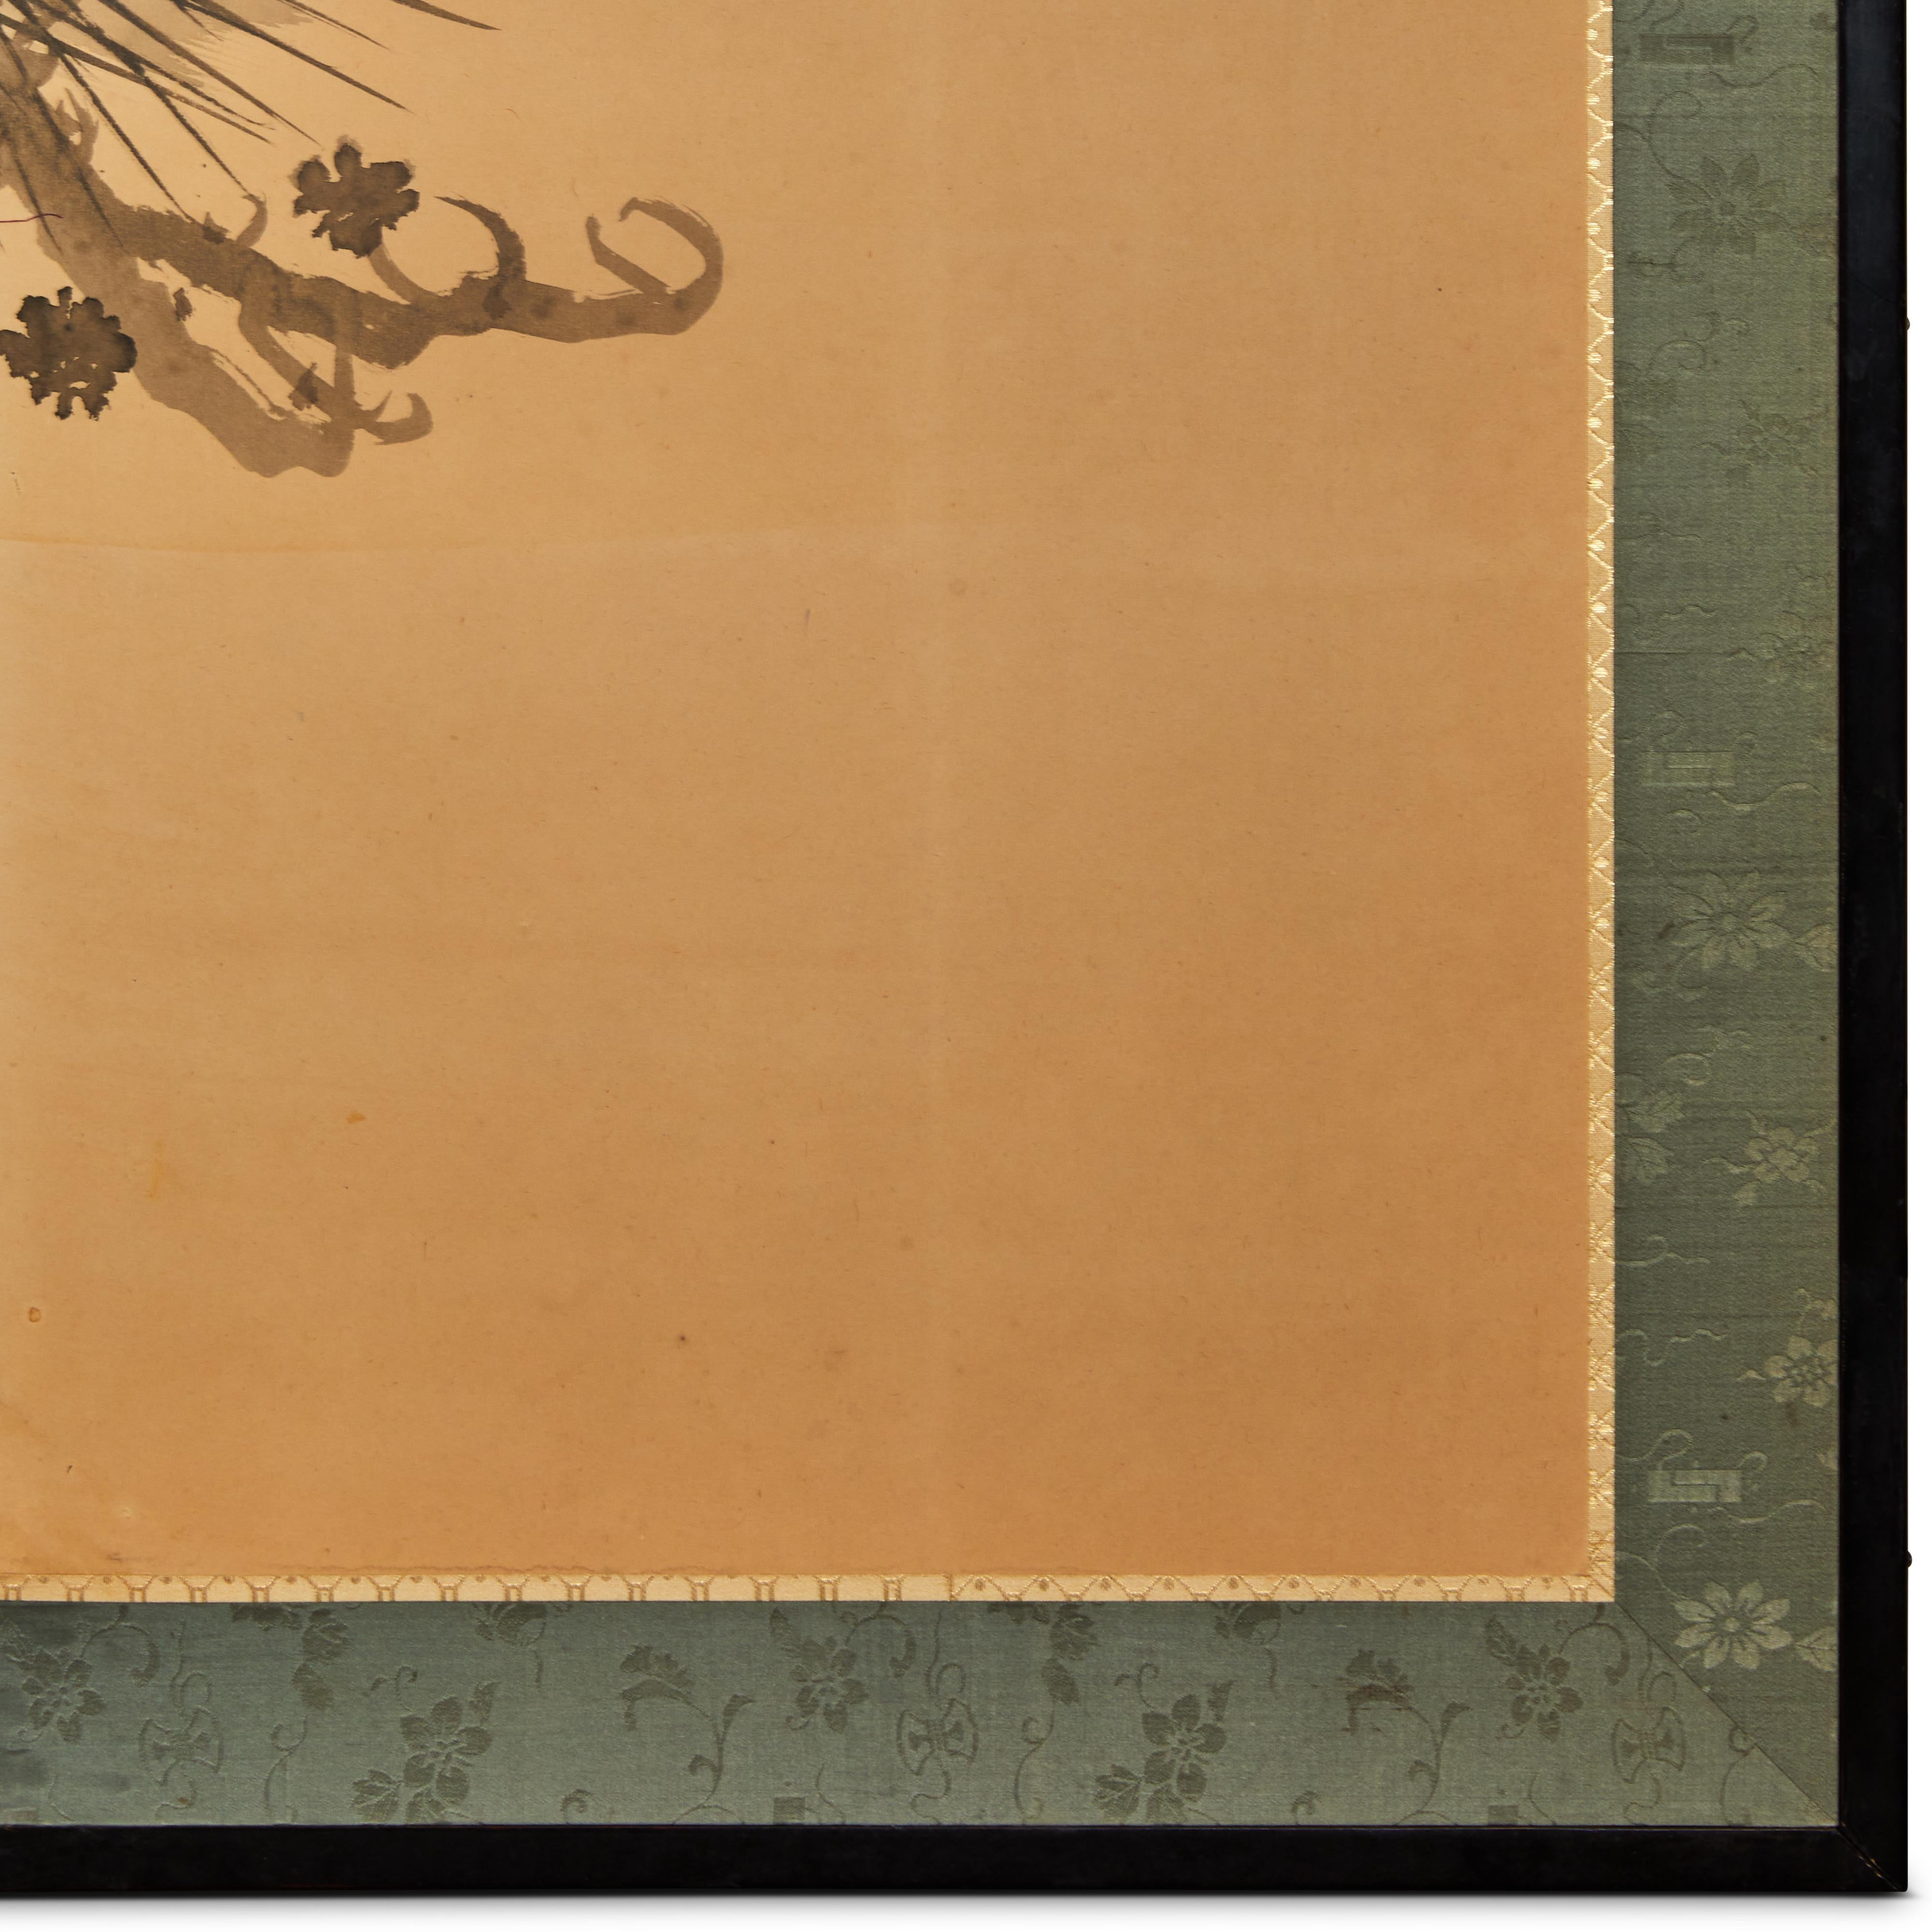 Meiji period (1868 - 1912) sumi-e (or ink painting) on paper of a venerable pine tree with limbs stretching out over a bluff.  Beautiful signature and seal read: Biei.  Ink on paper with a silk brocade border.